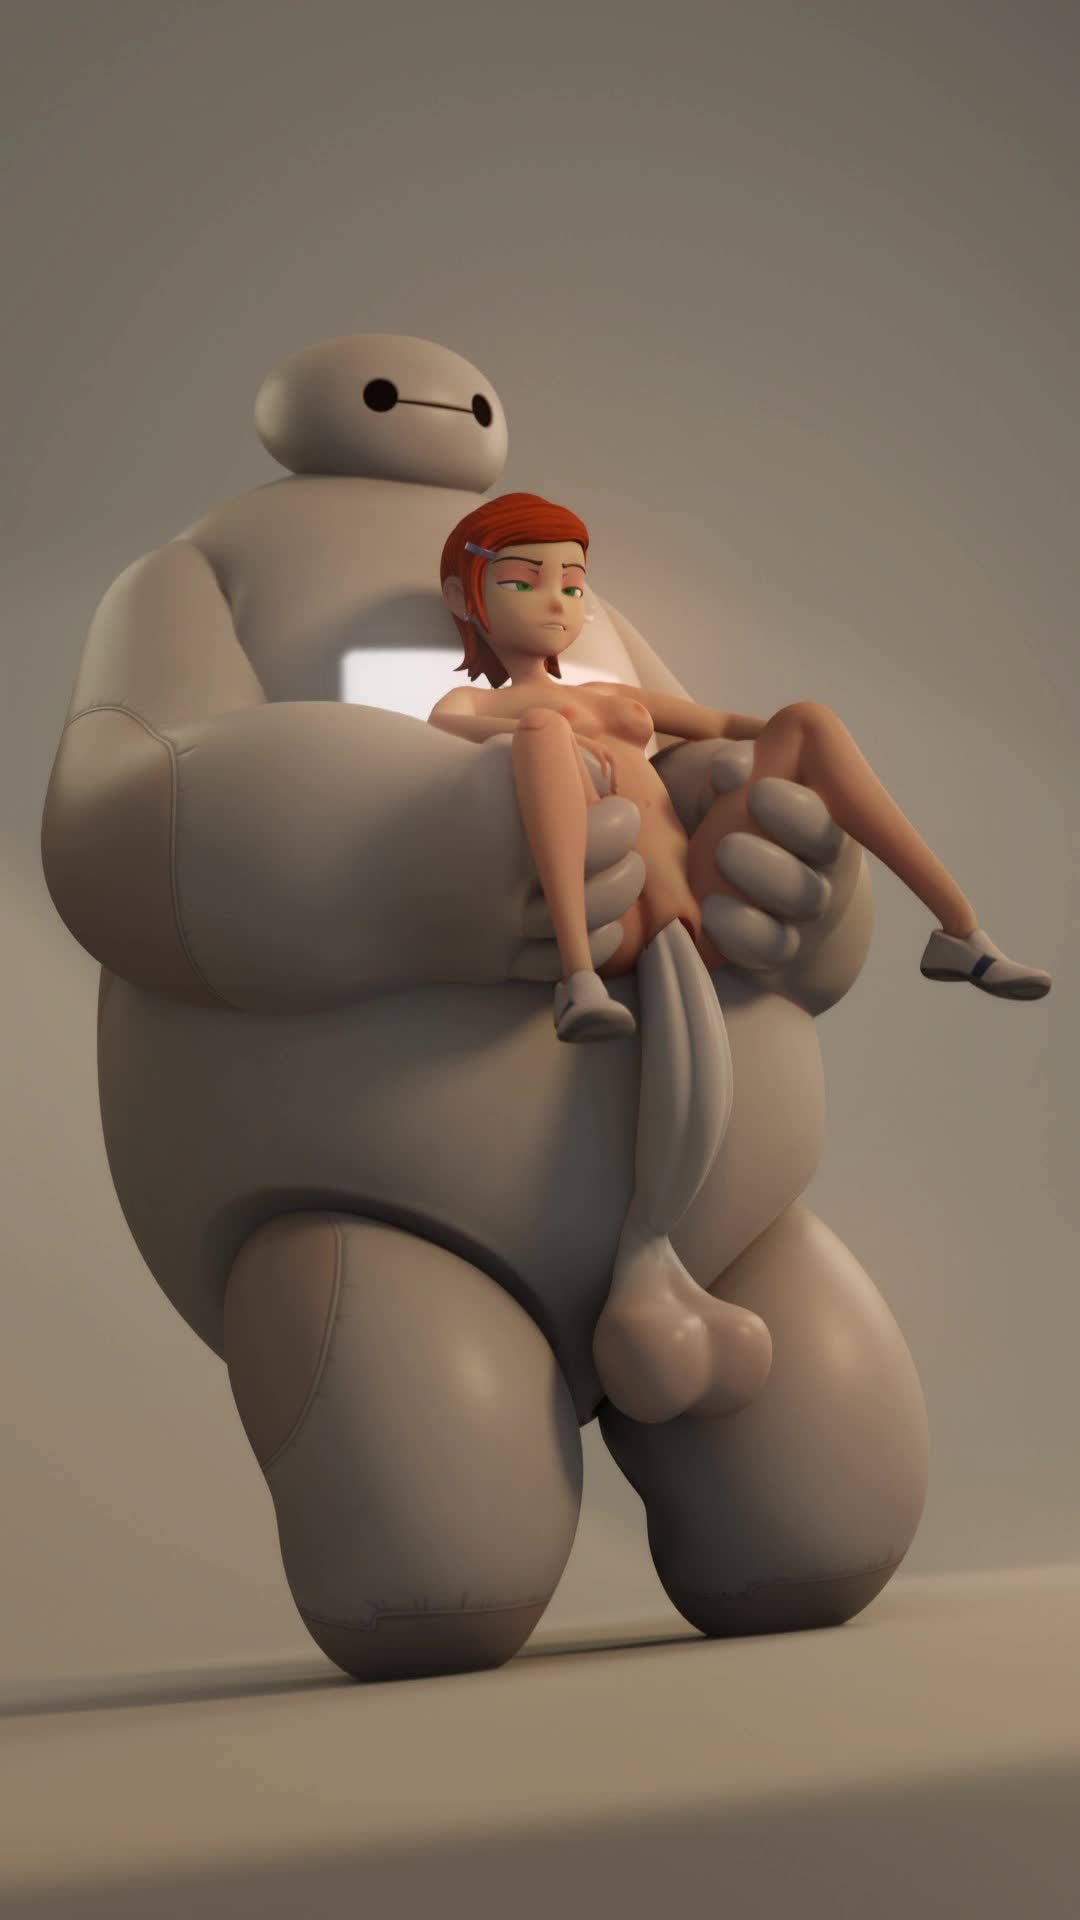 Gwen and Baymax stand carry sex – Ben 10 NSFW animation thumbnail